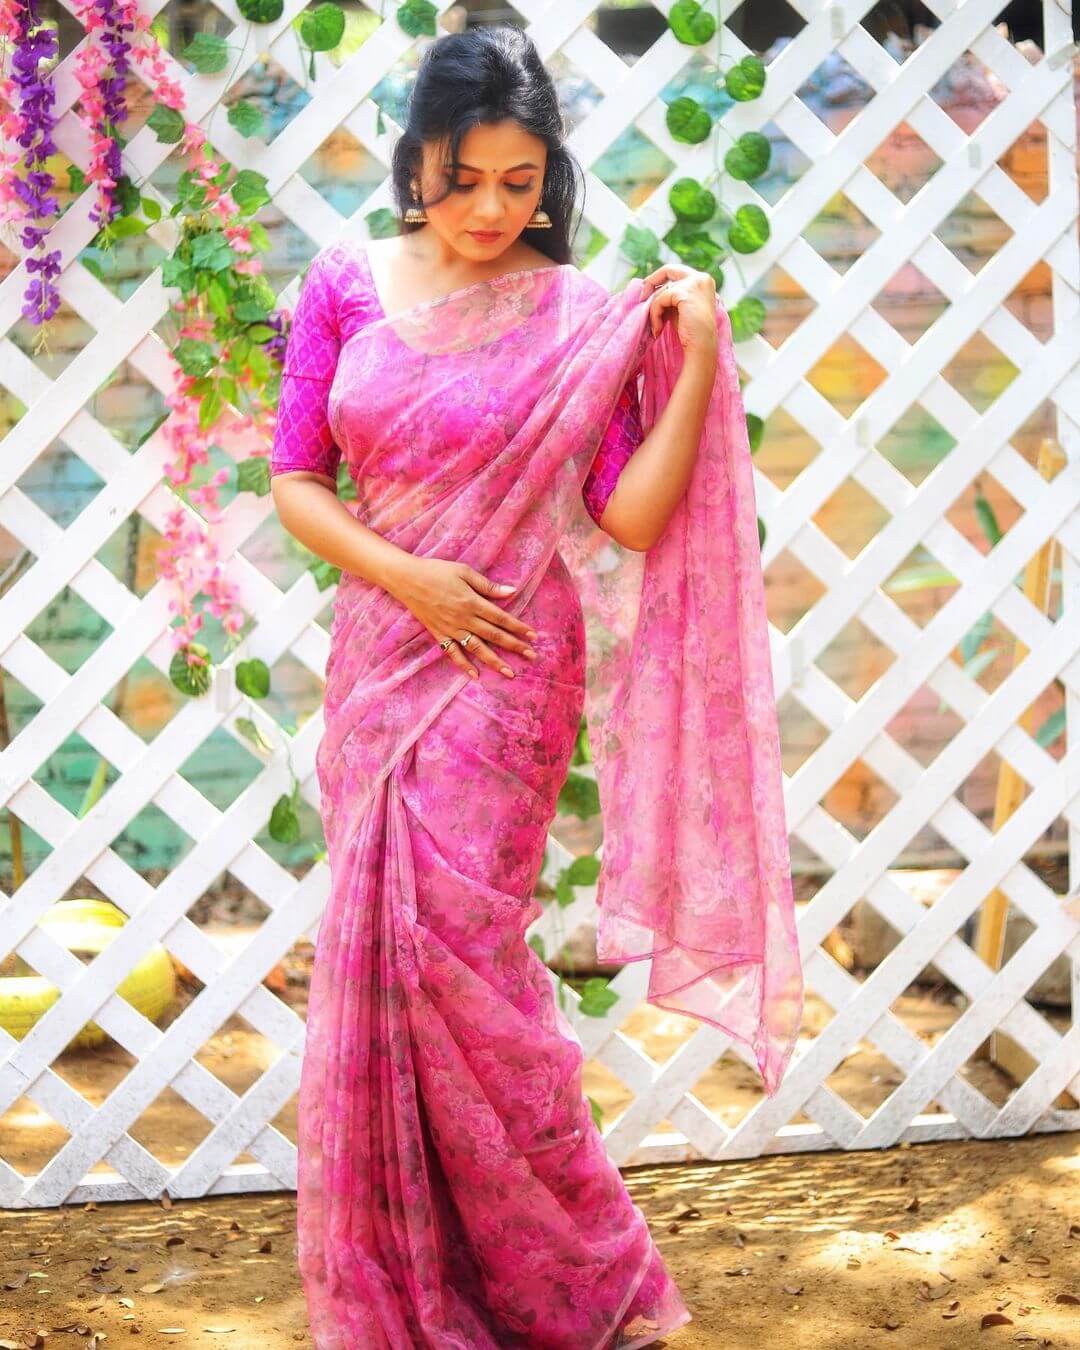 Prarthana-Behere-Breezy-Look-In-Pink-Floral-Saree-Outfit - K4 Fashion